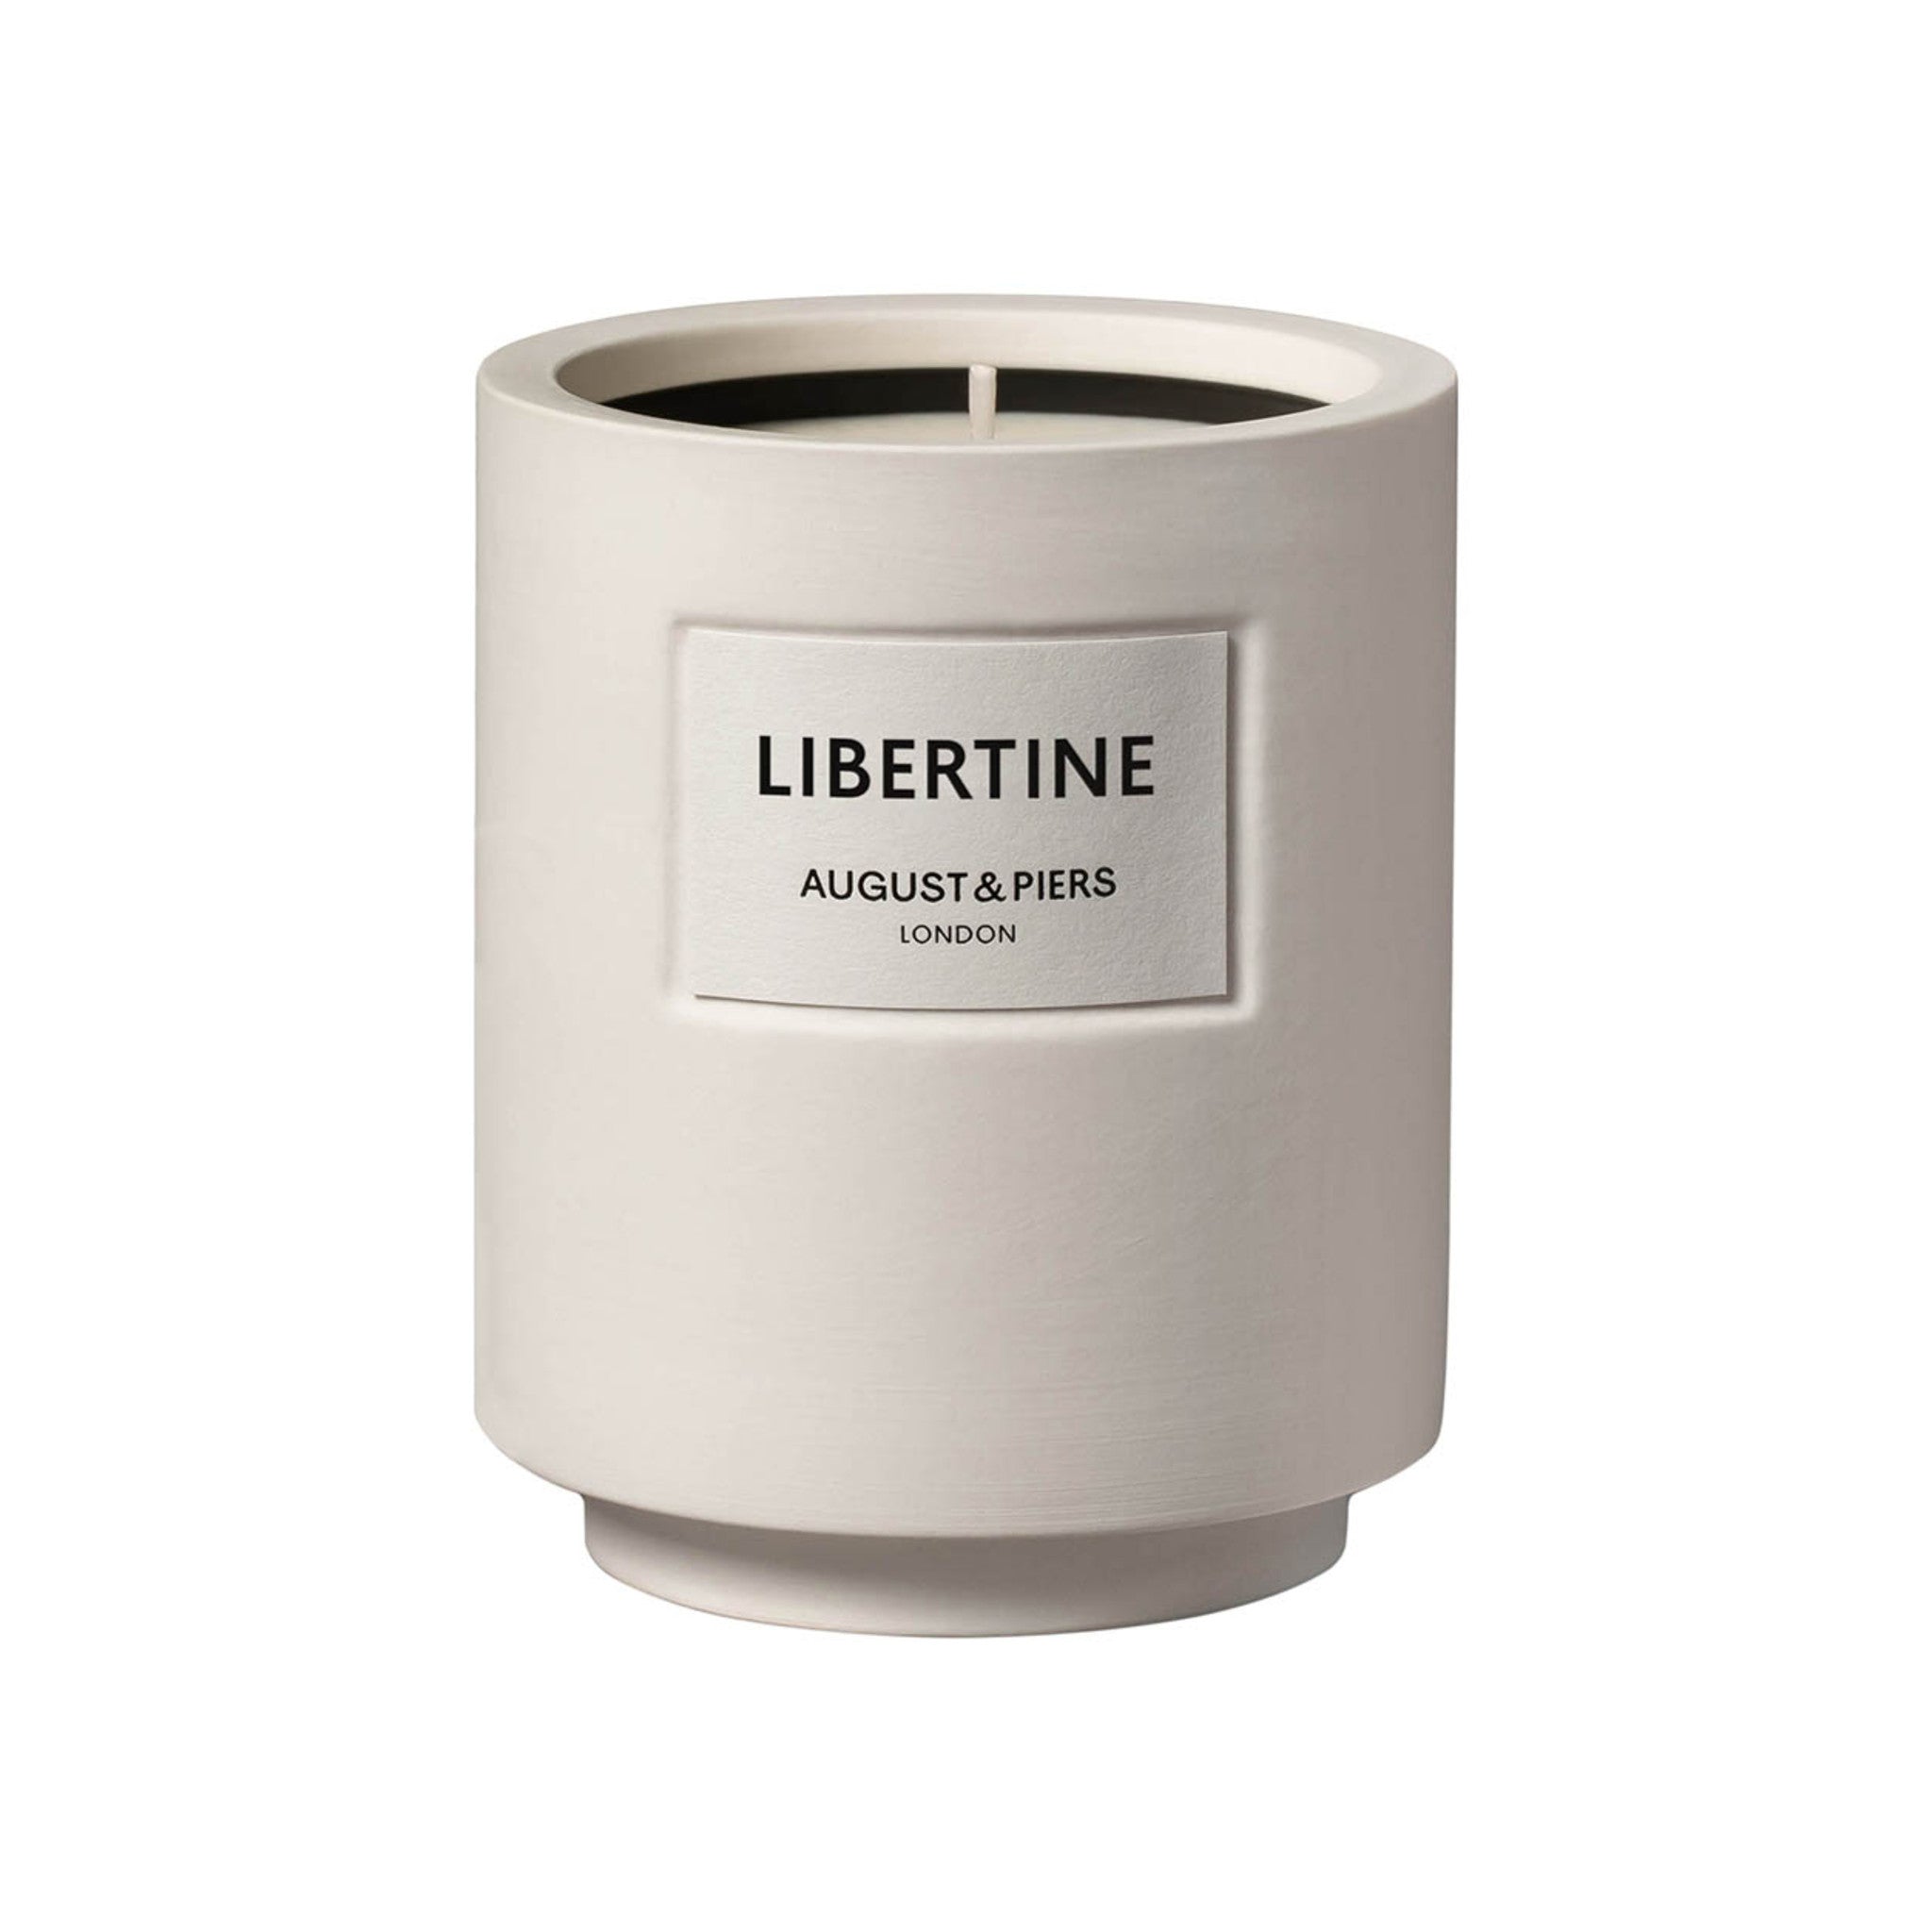 August & Piers Libertine Candle main image.